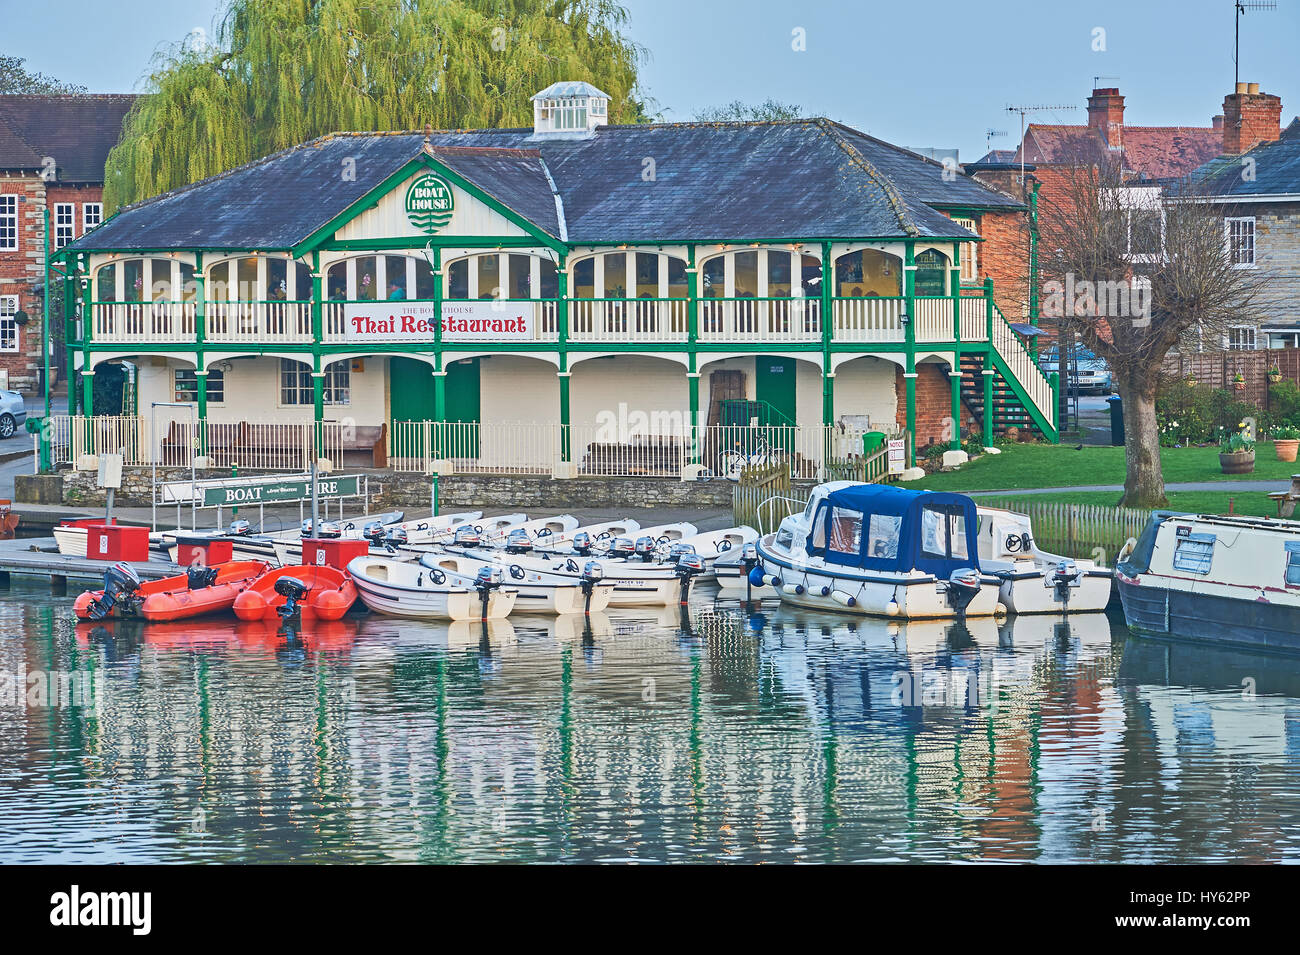 The old boat house and hire boats moored on the River Avon, Stratford upon Avon, Warwickshire. Stock Photo